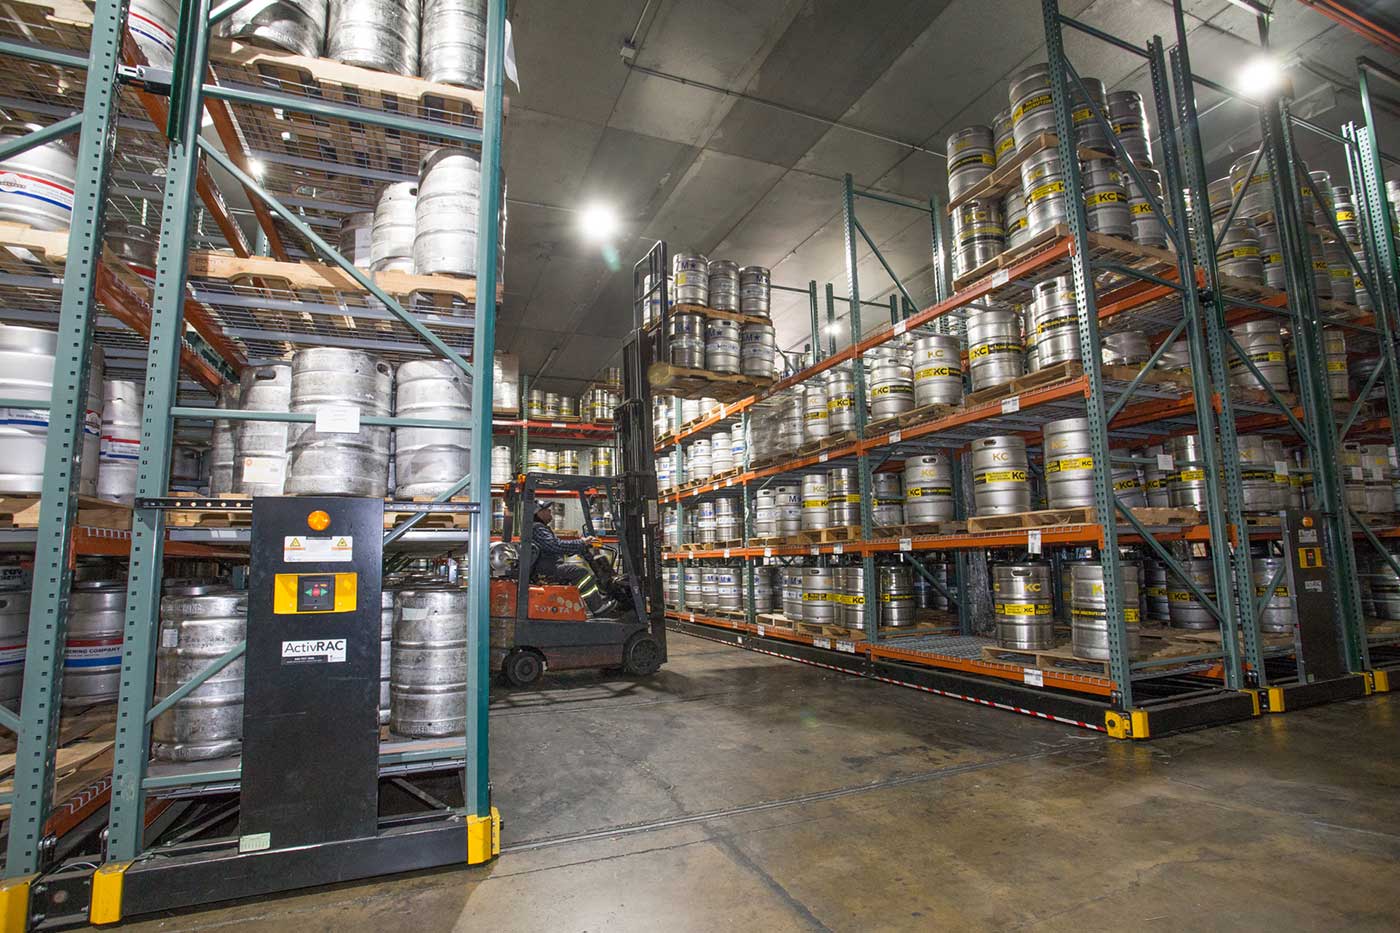 Powered mobile racking system holding beer kegs with a forklift lowering a pallet of kegs